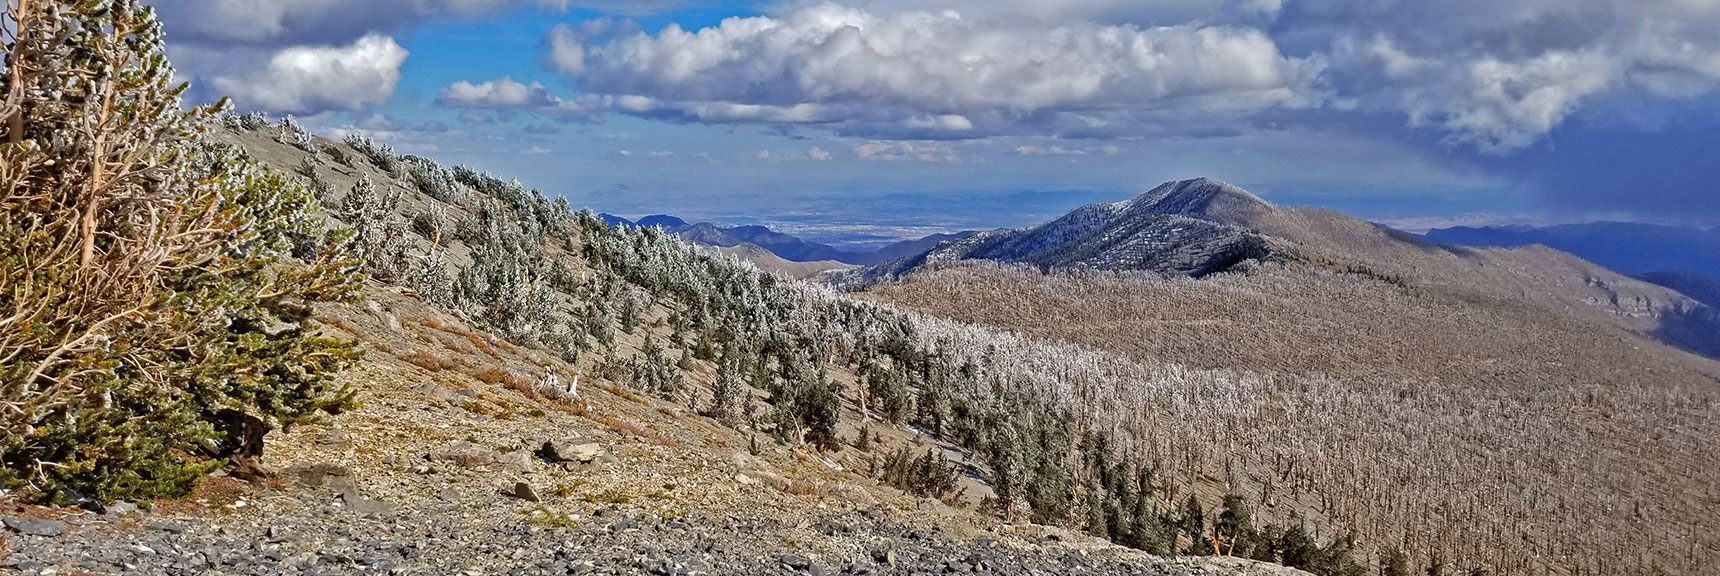 Griffith Peak and Burn Area Coming Into View from the High Saddle | Charleston Peak Loop October Snow Dusting | Mt. Charleston Wilderness | Spring Mountains, Nevada